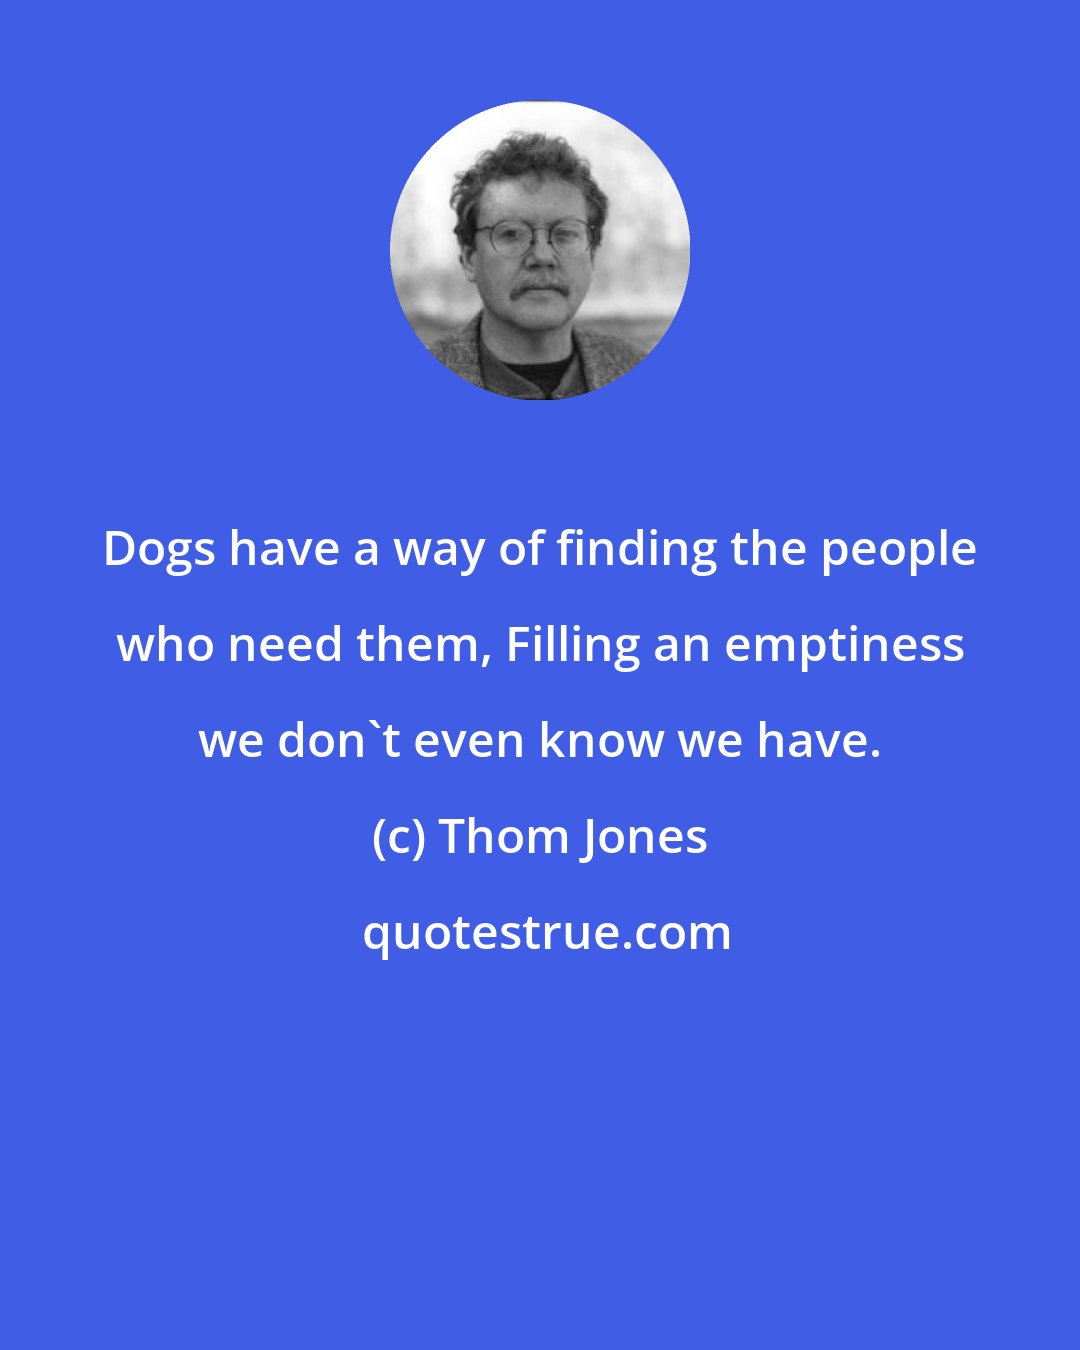 Thom Jones: Dogs have a way of finding the people who need them, Filling an emptiness we don't even know we have.